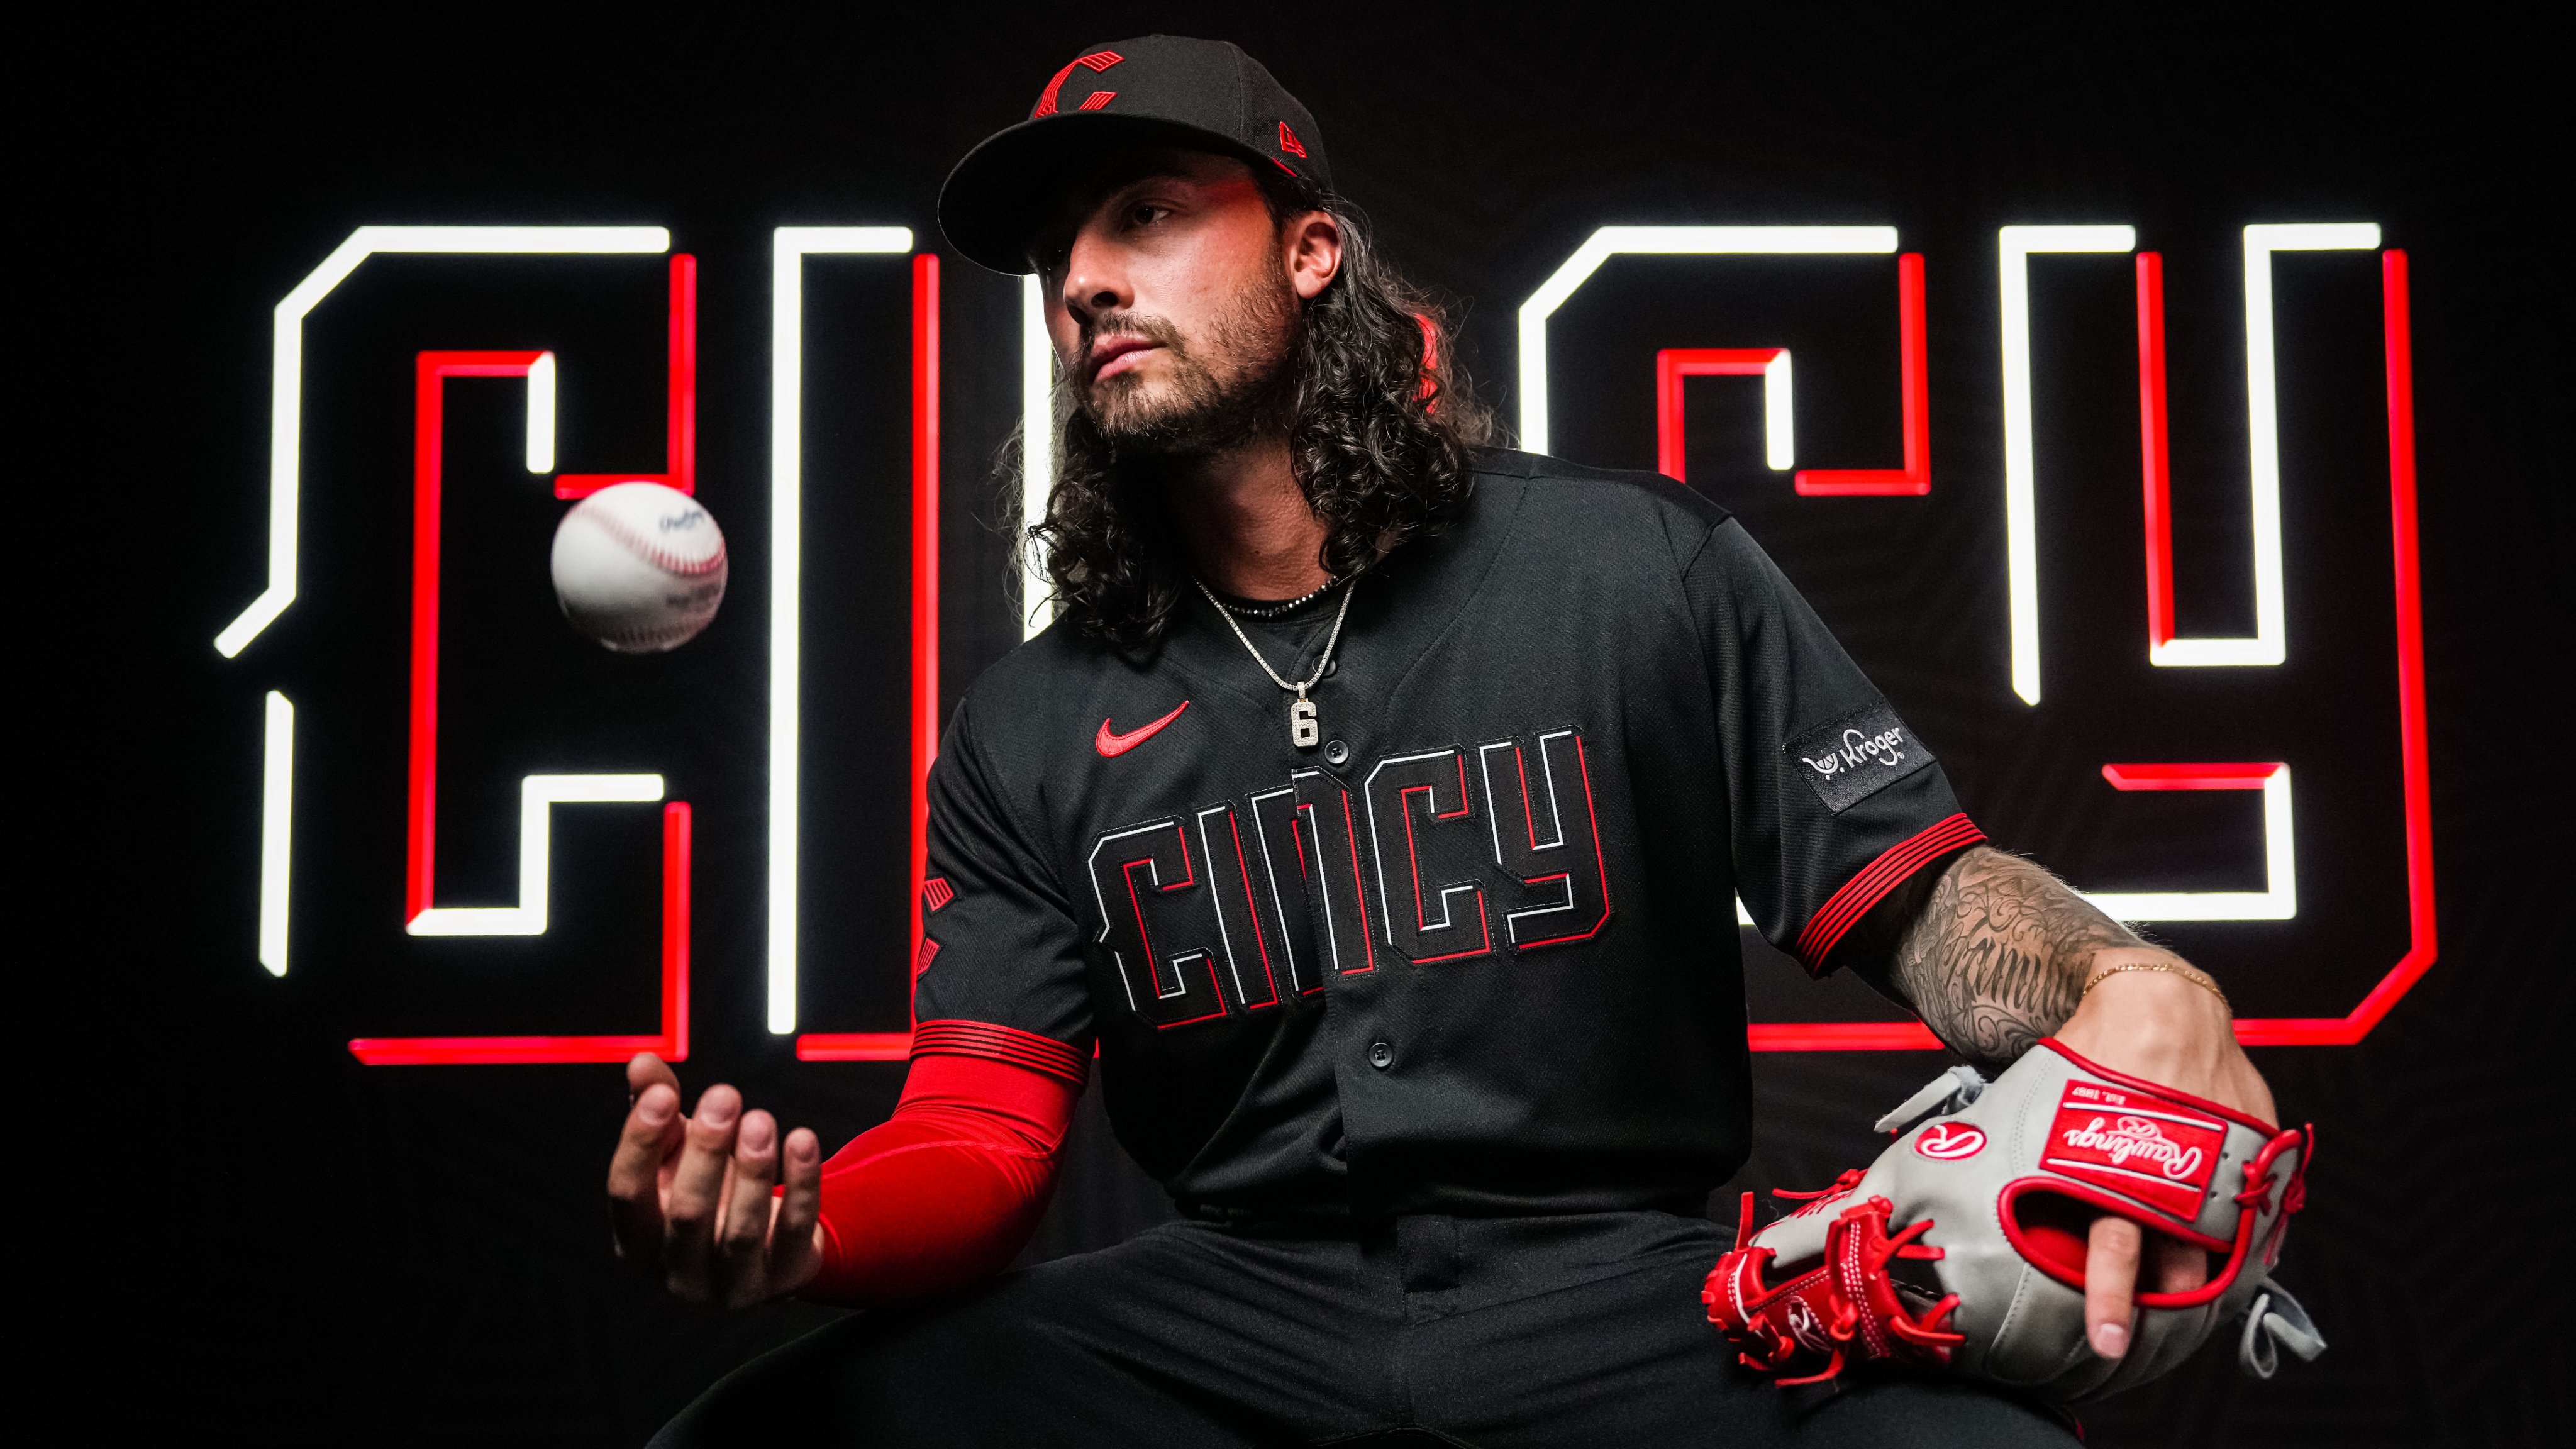 Reds debut 'City Connect' uniforms against Yankees